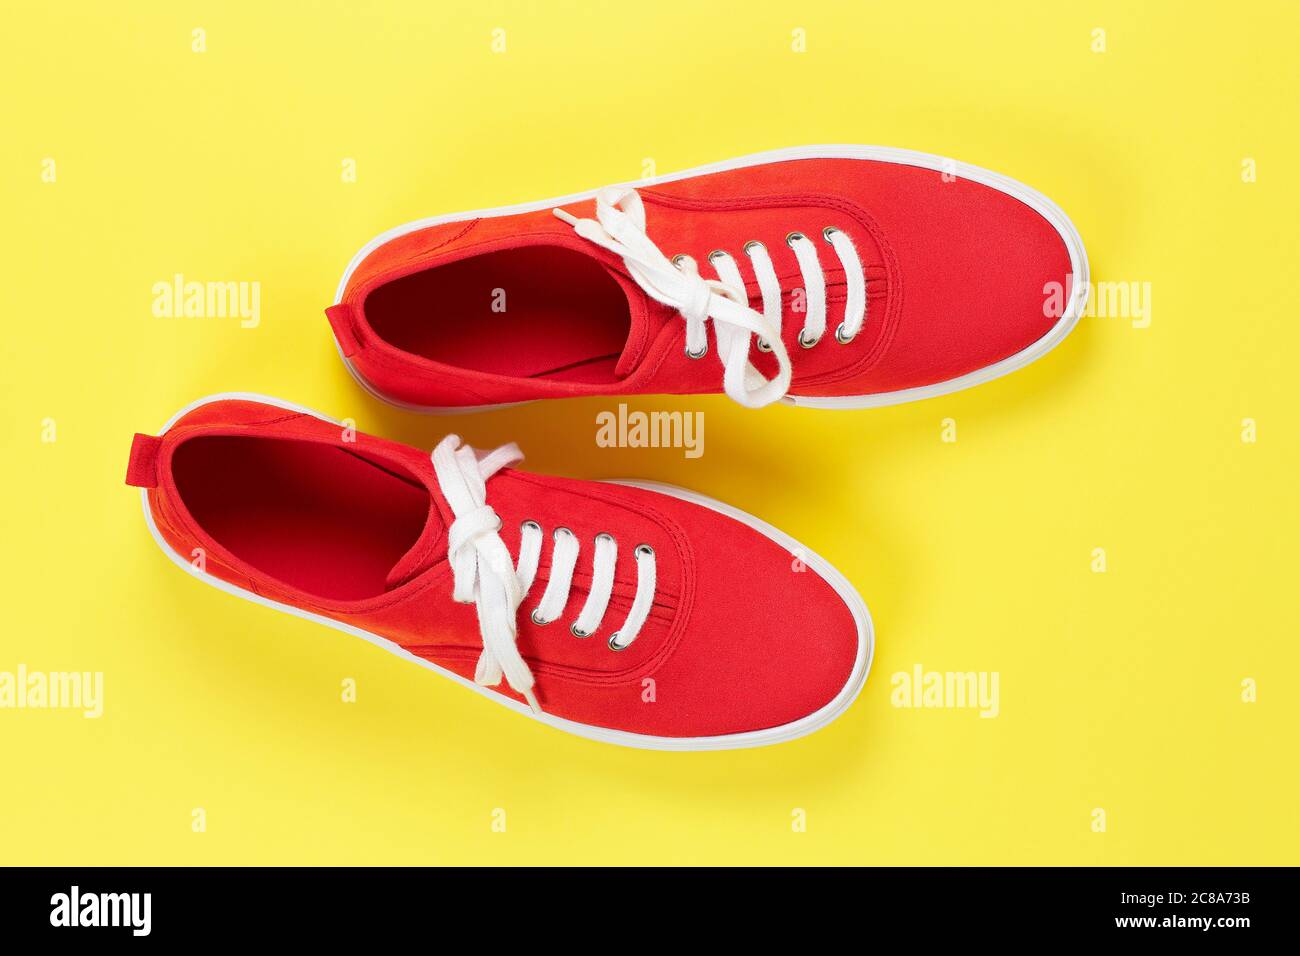 pair of red suede shoes on yellow surface Stock Photo - Alamy